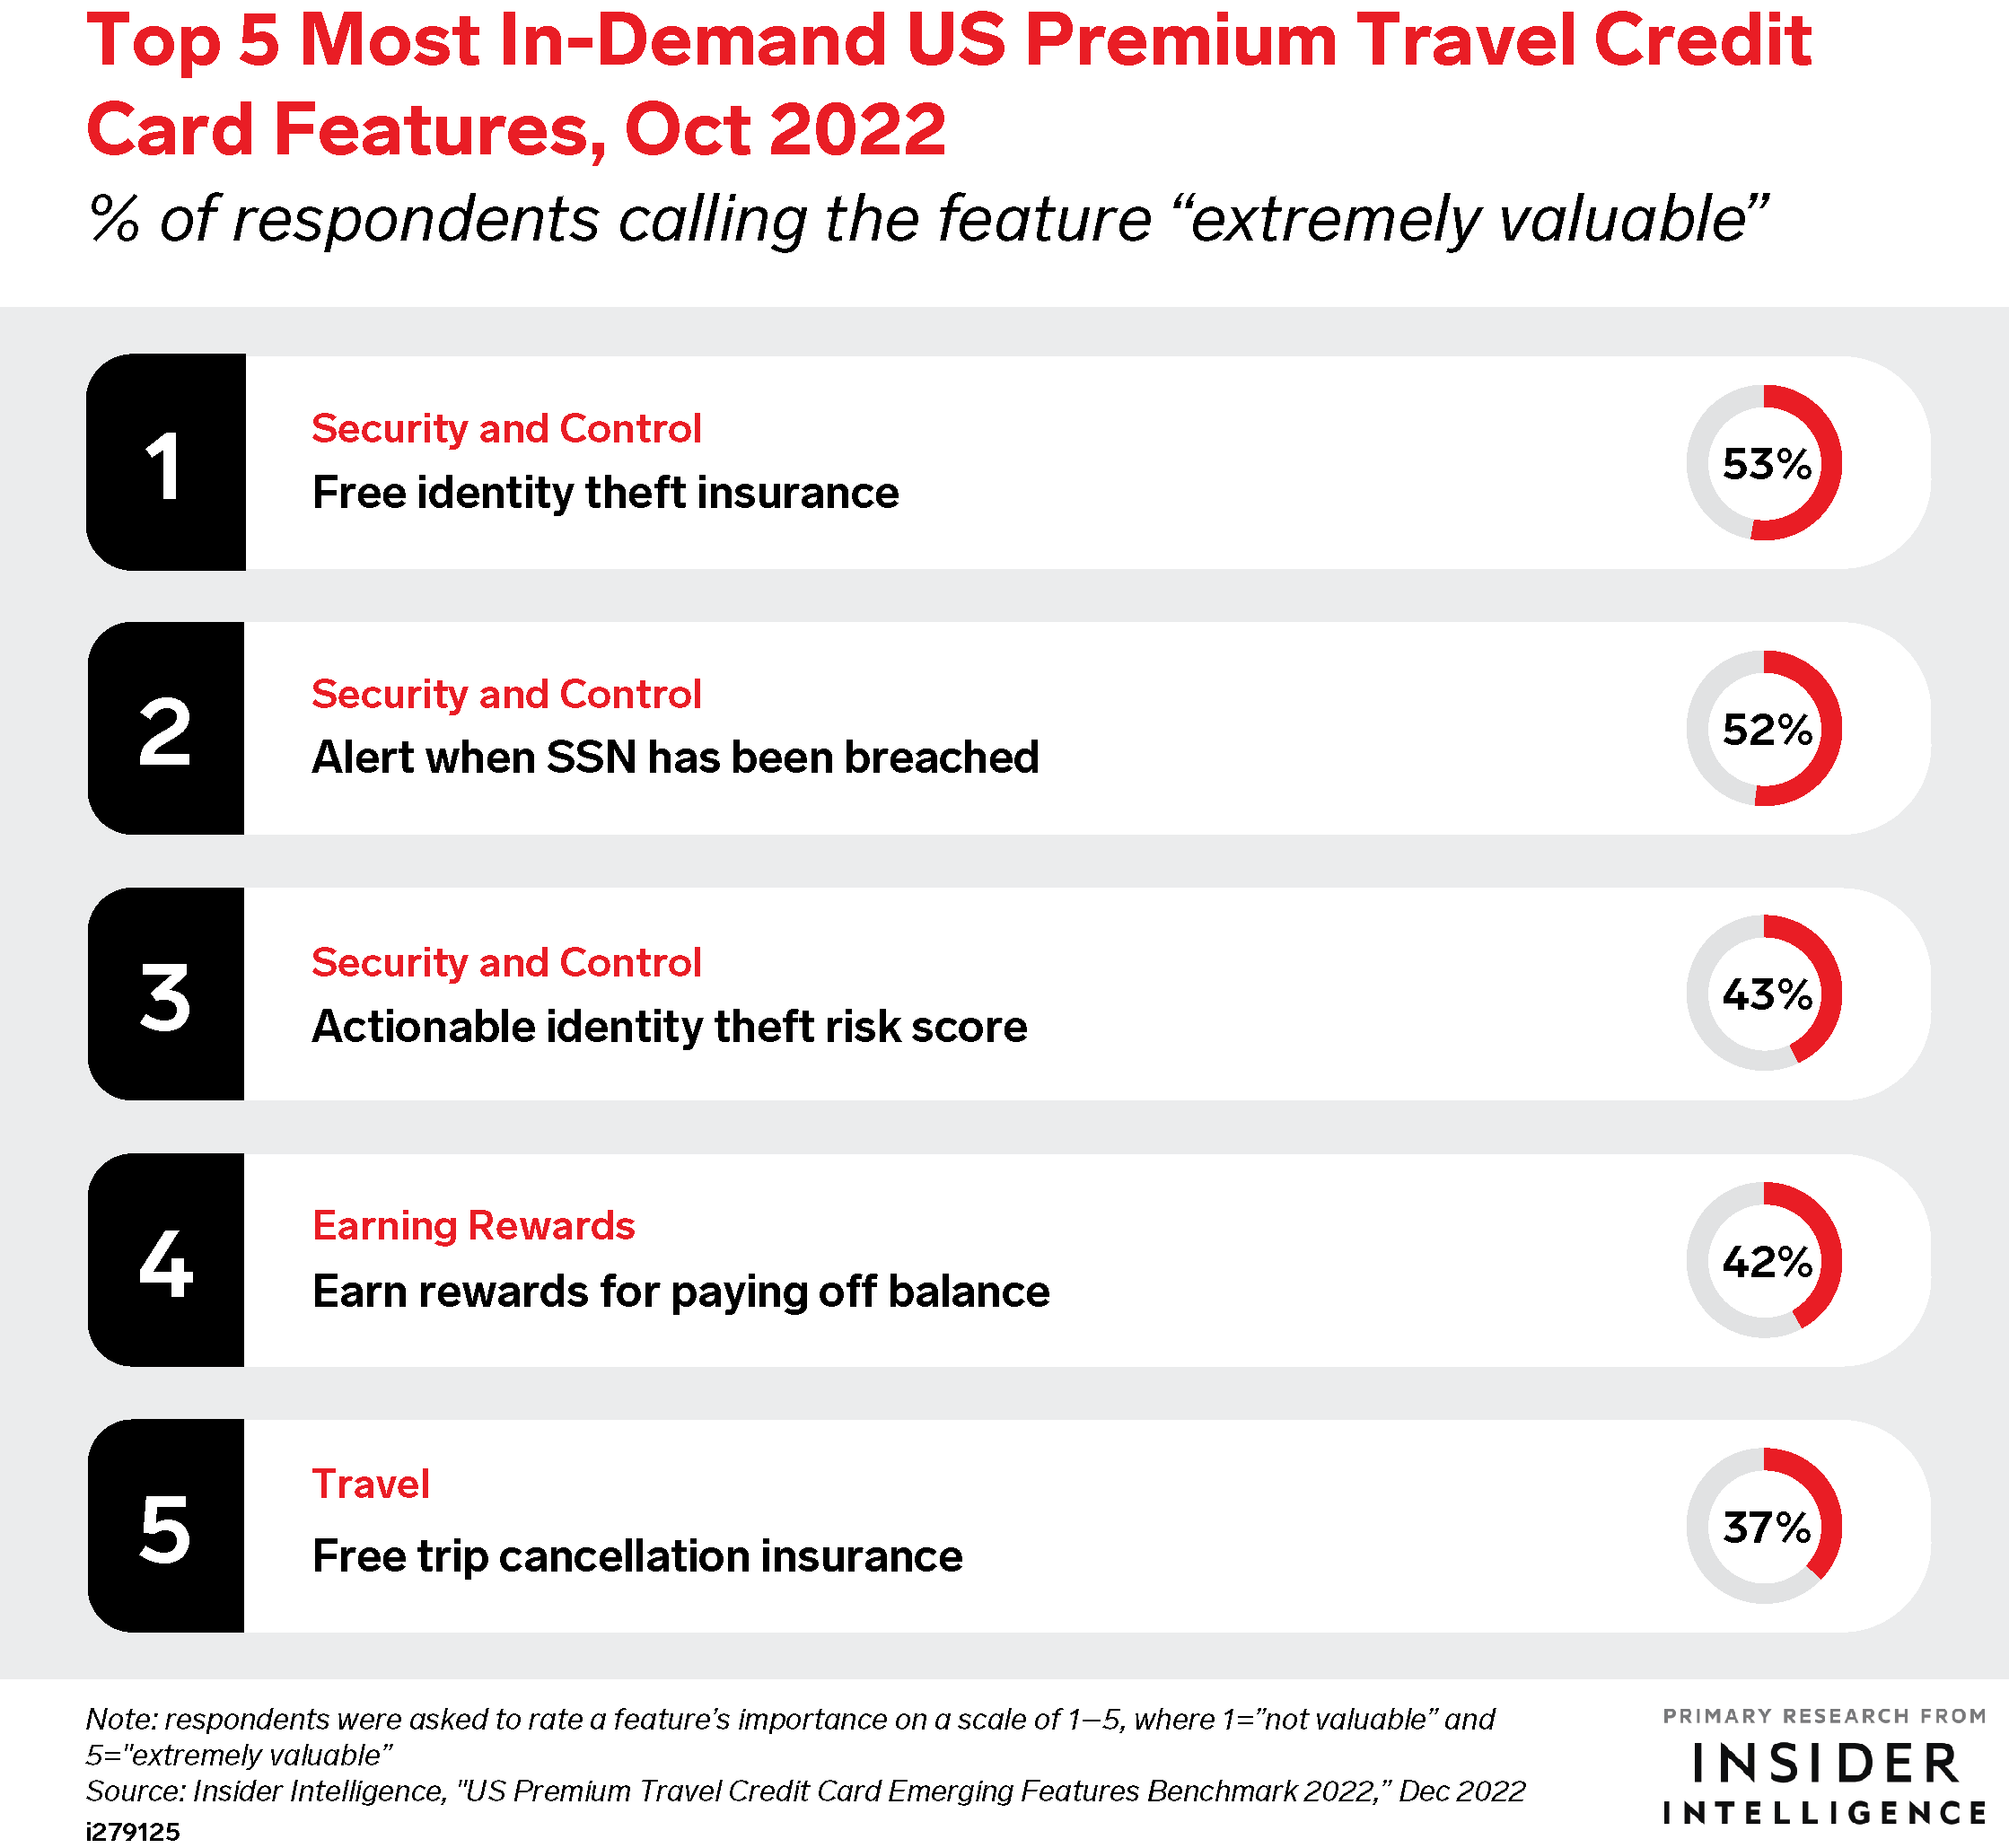 Top 5 Most In-Demand US Premium Travel Credit Card Features, Oct 2022 (% of respondents who called each feature 